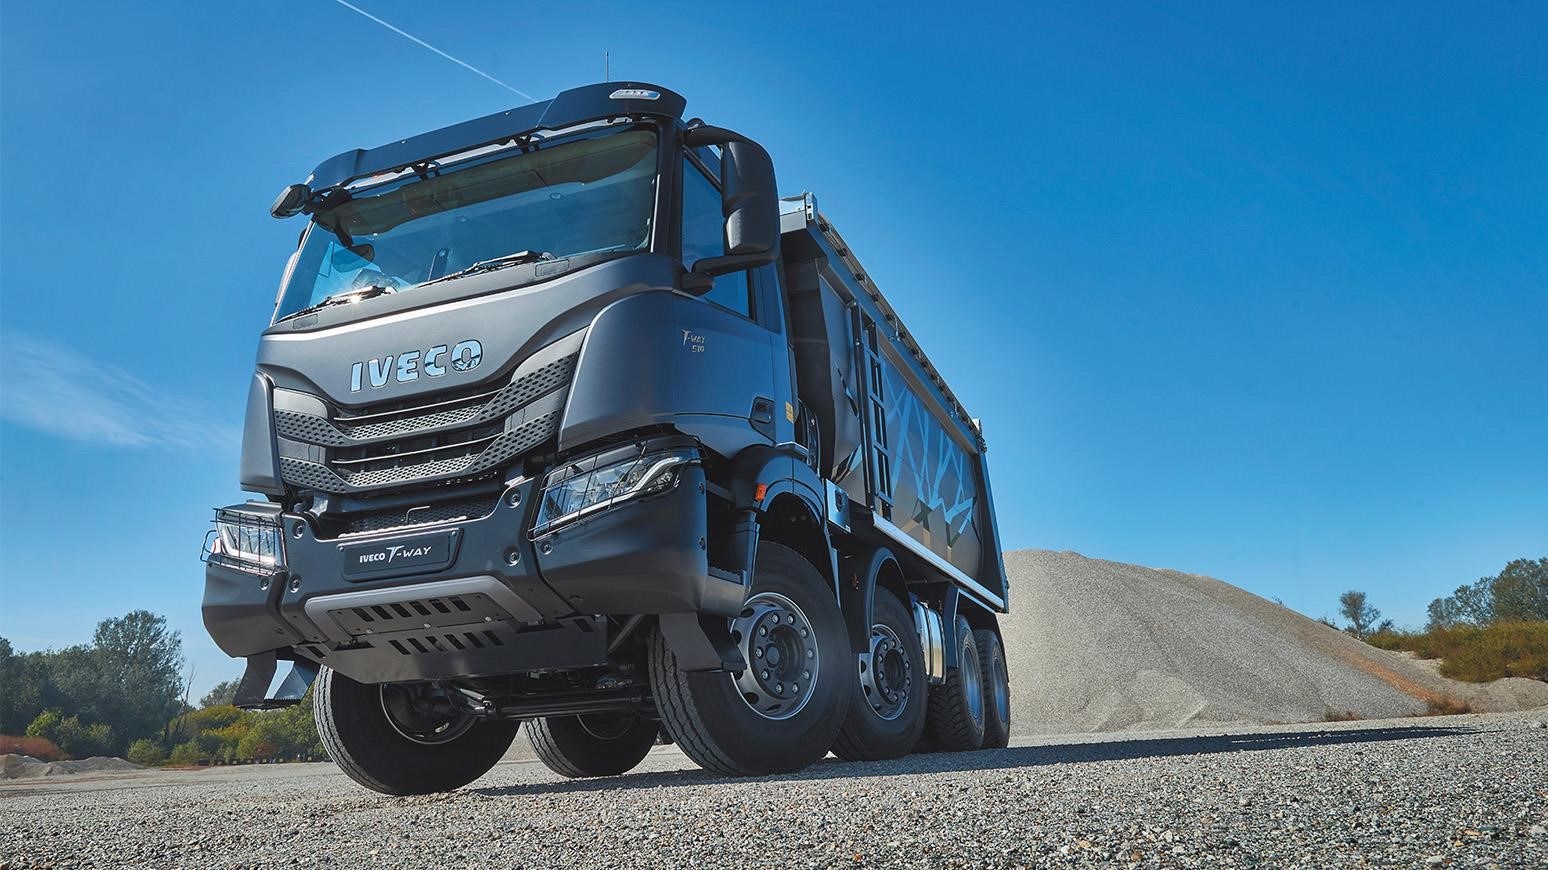 IVECO Debuts 'T For Tough' T-WAY Heavy-Duty Off-Road Trucks